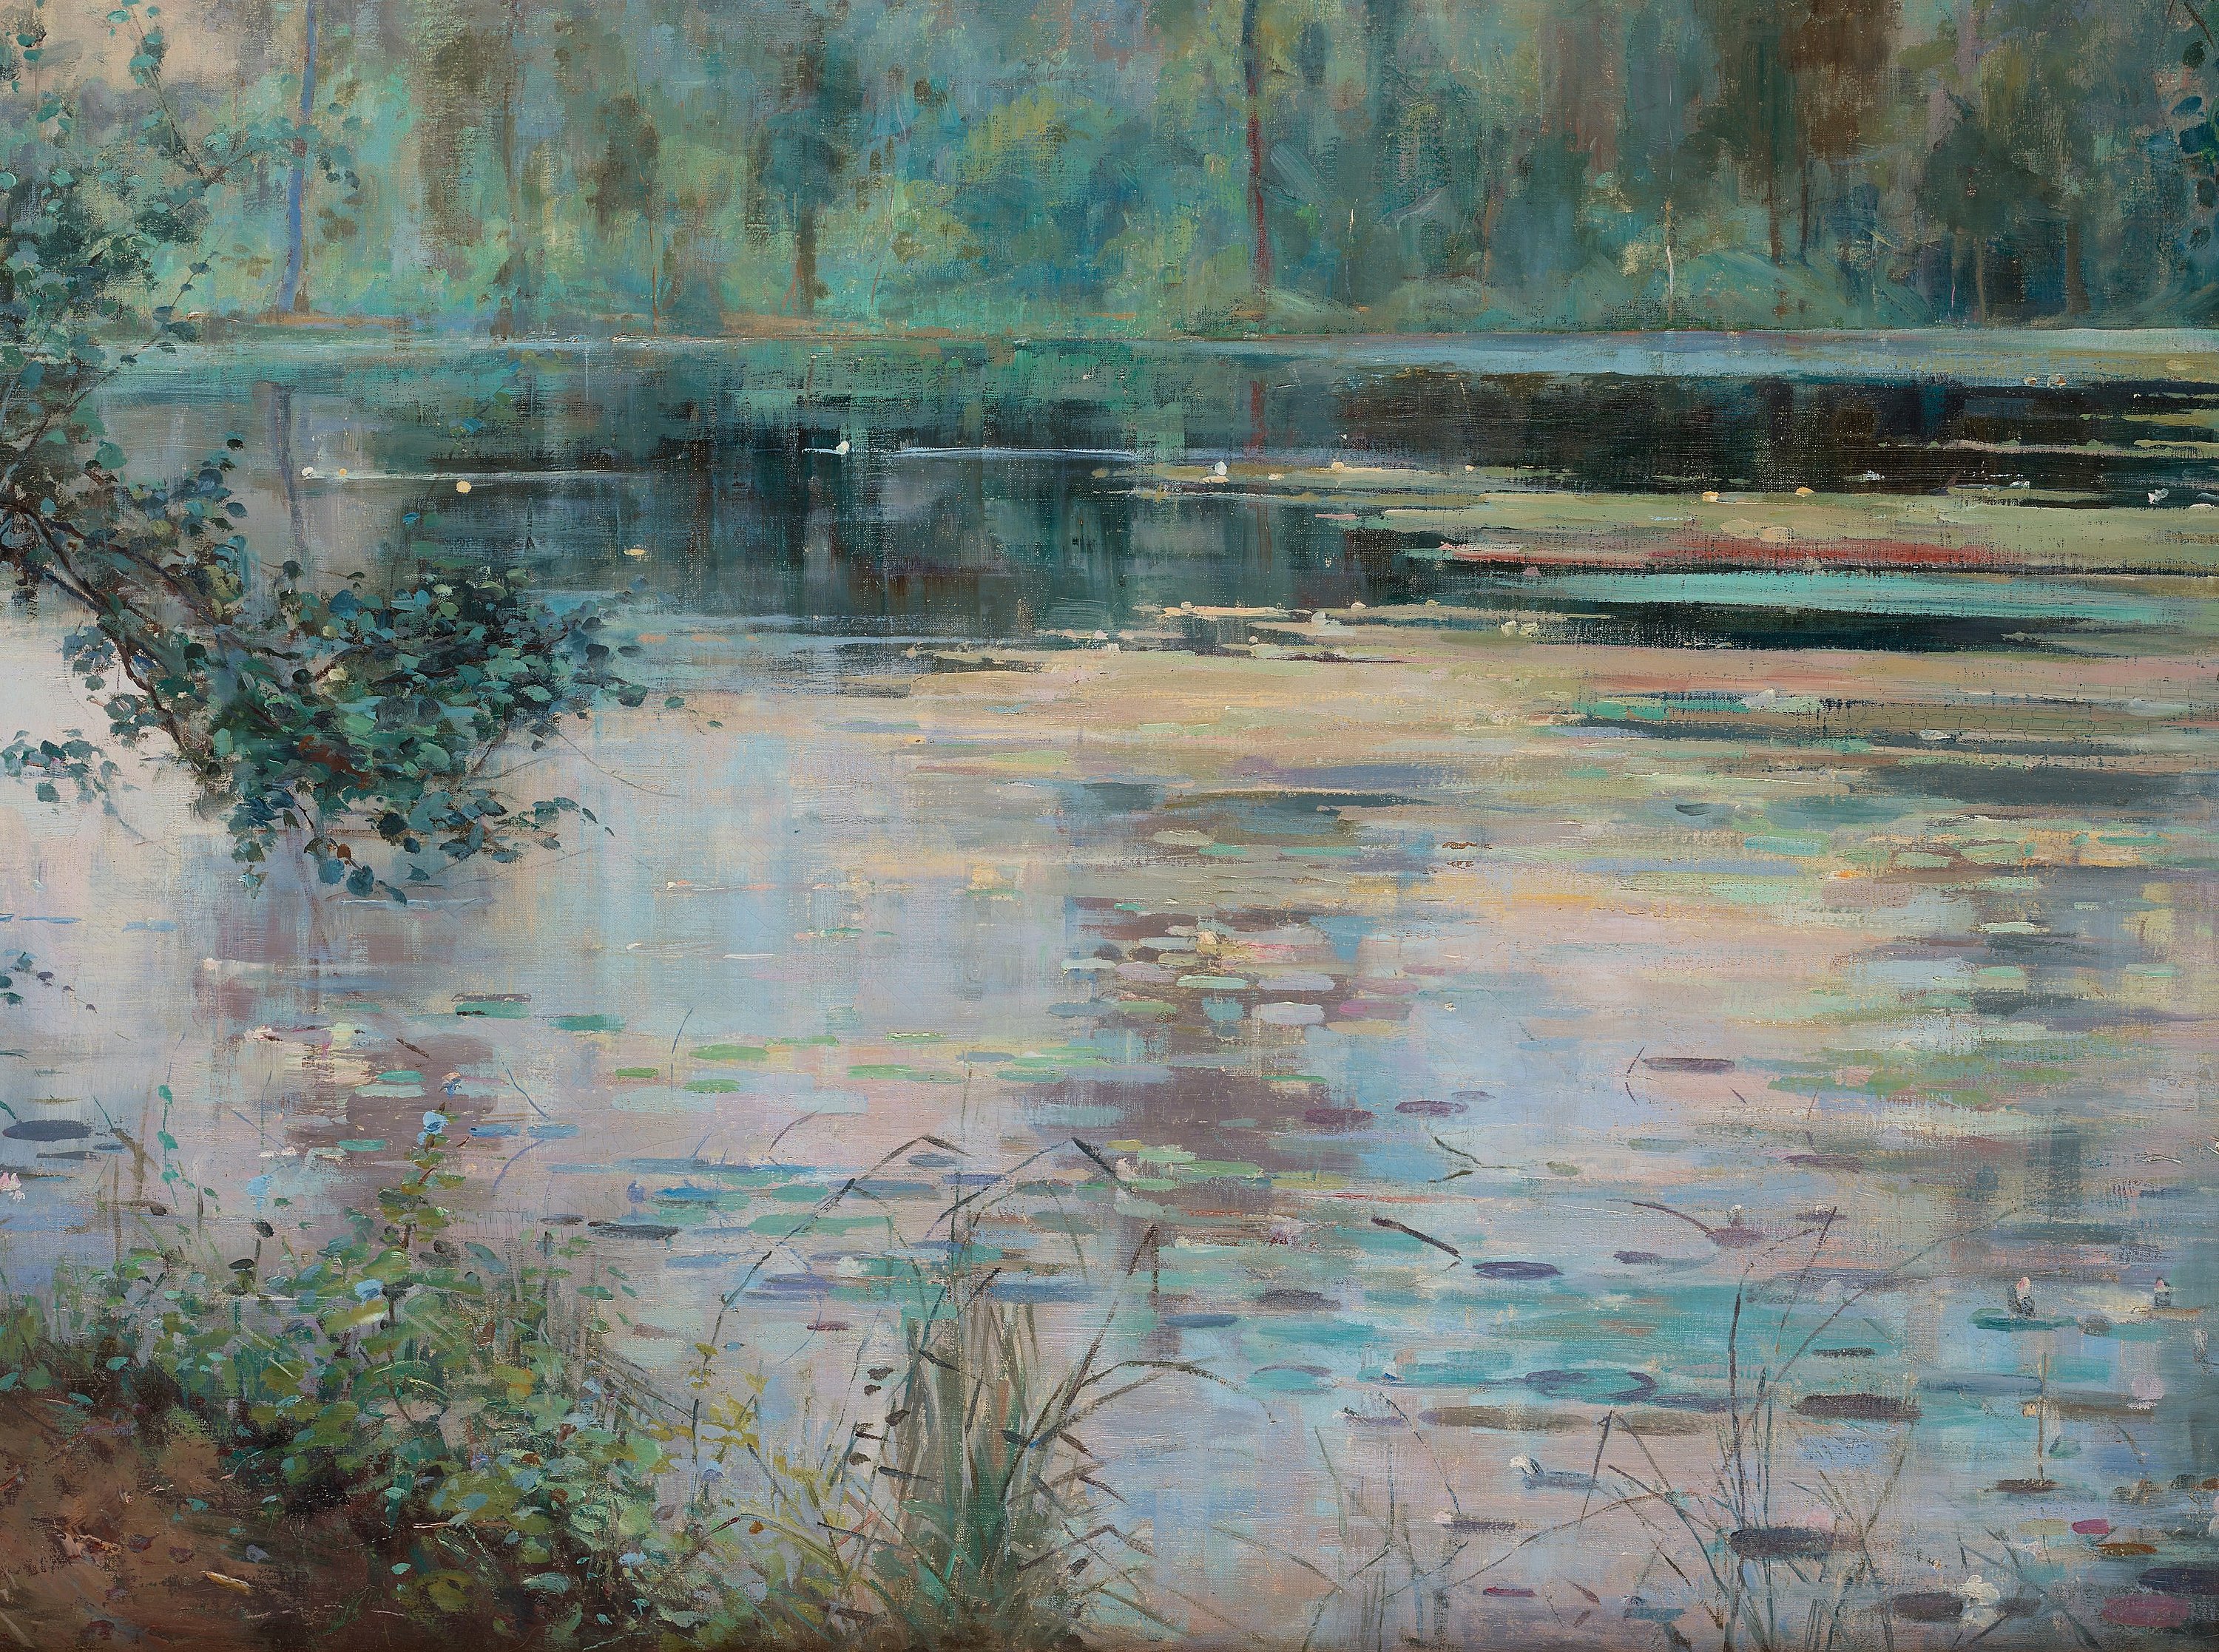 The Pond (Mist) by Julia Beck - c. 1900 - 76 x 107 cm private collection